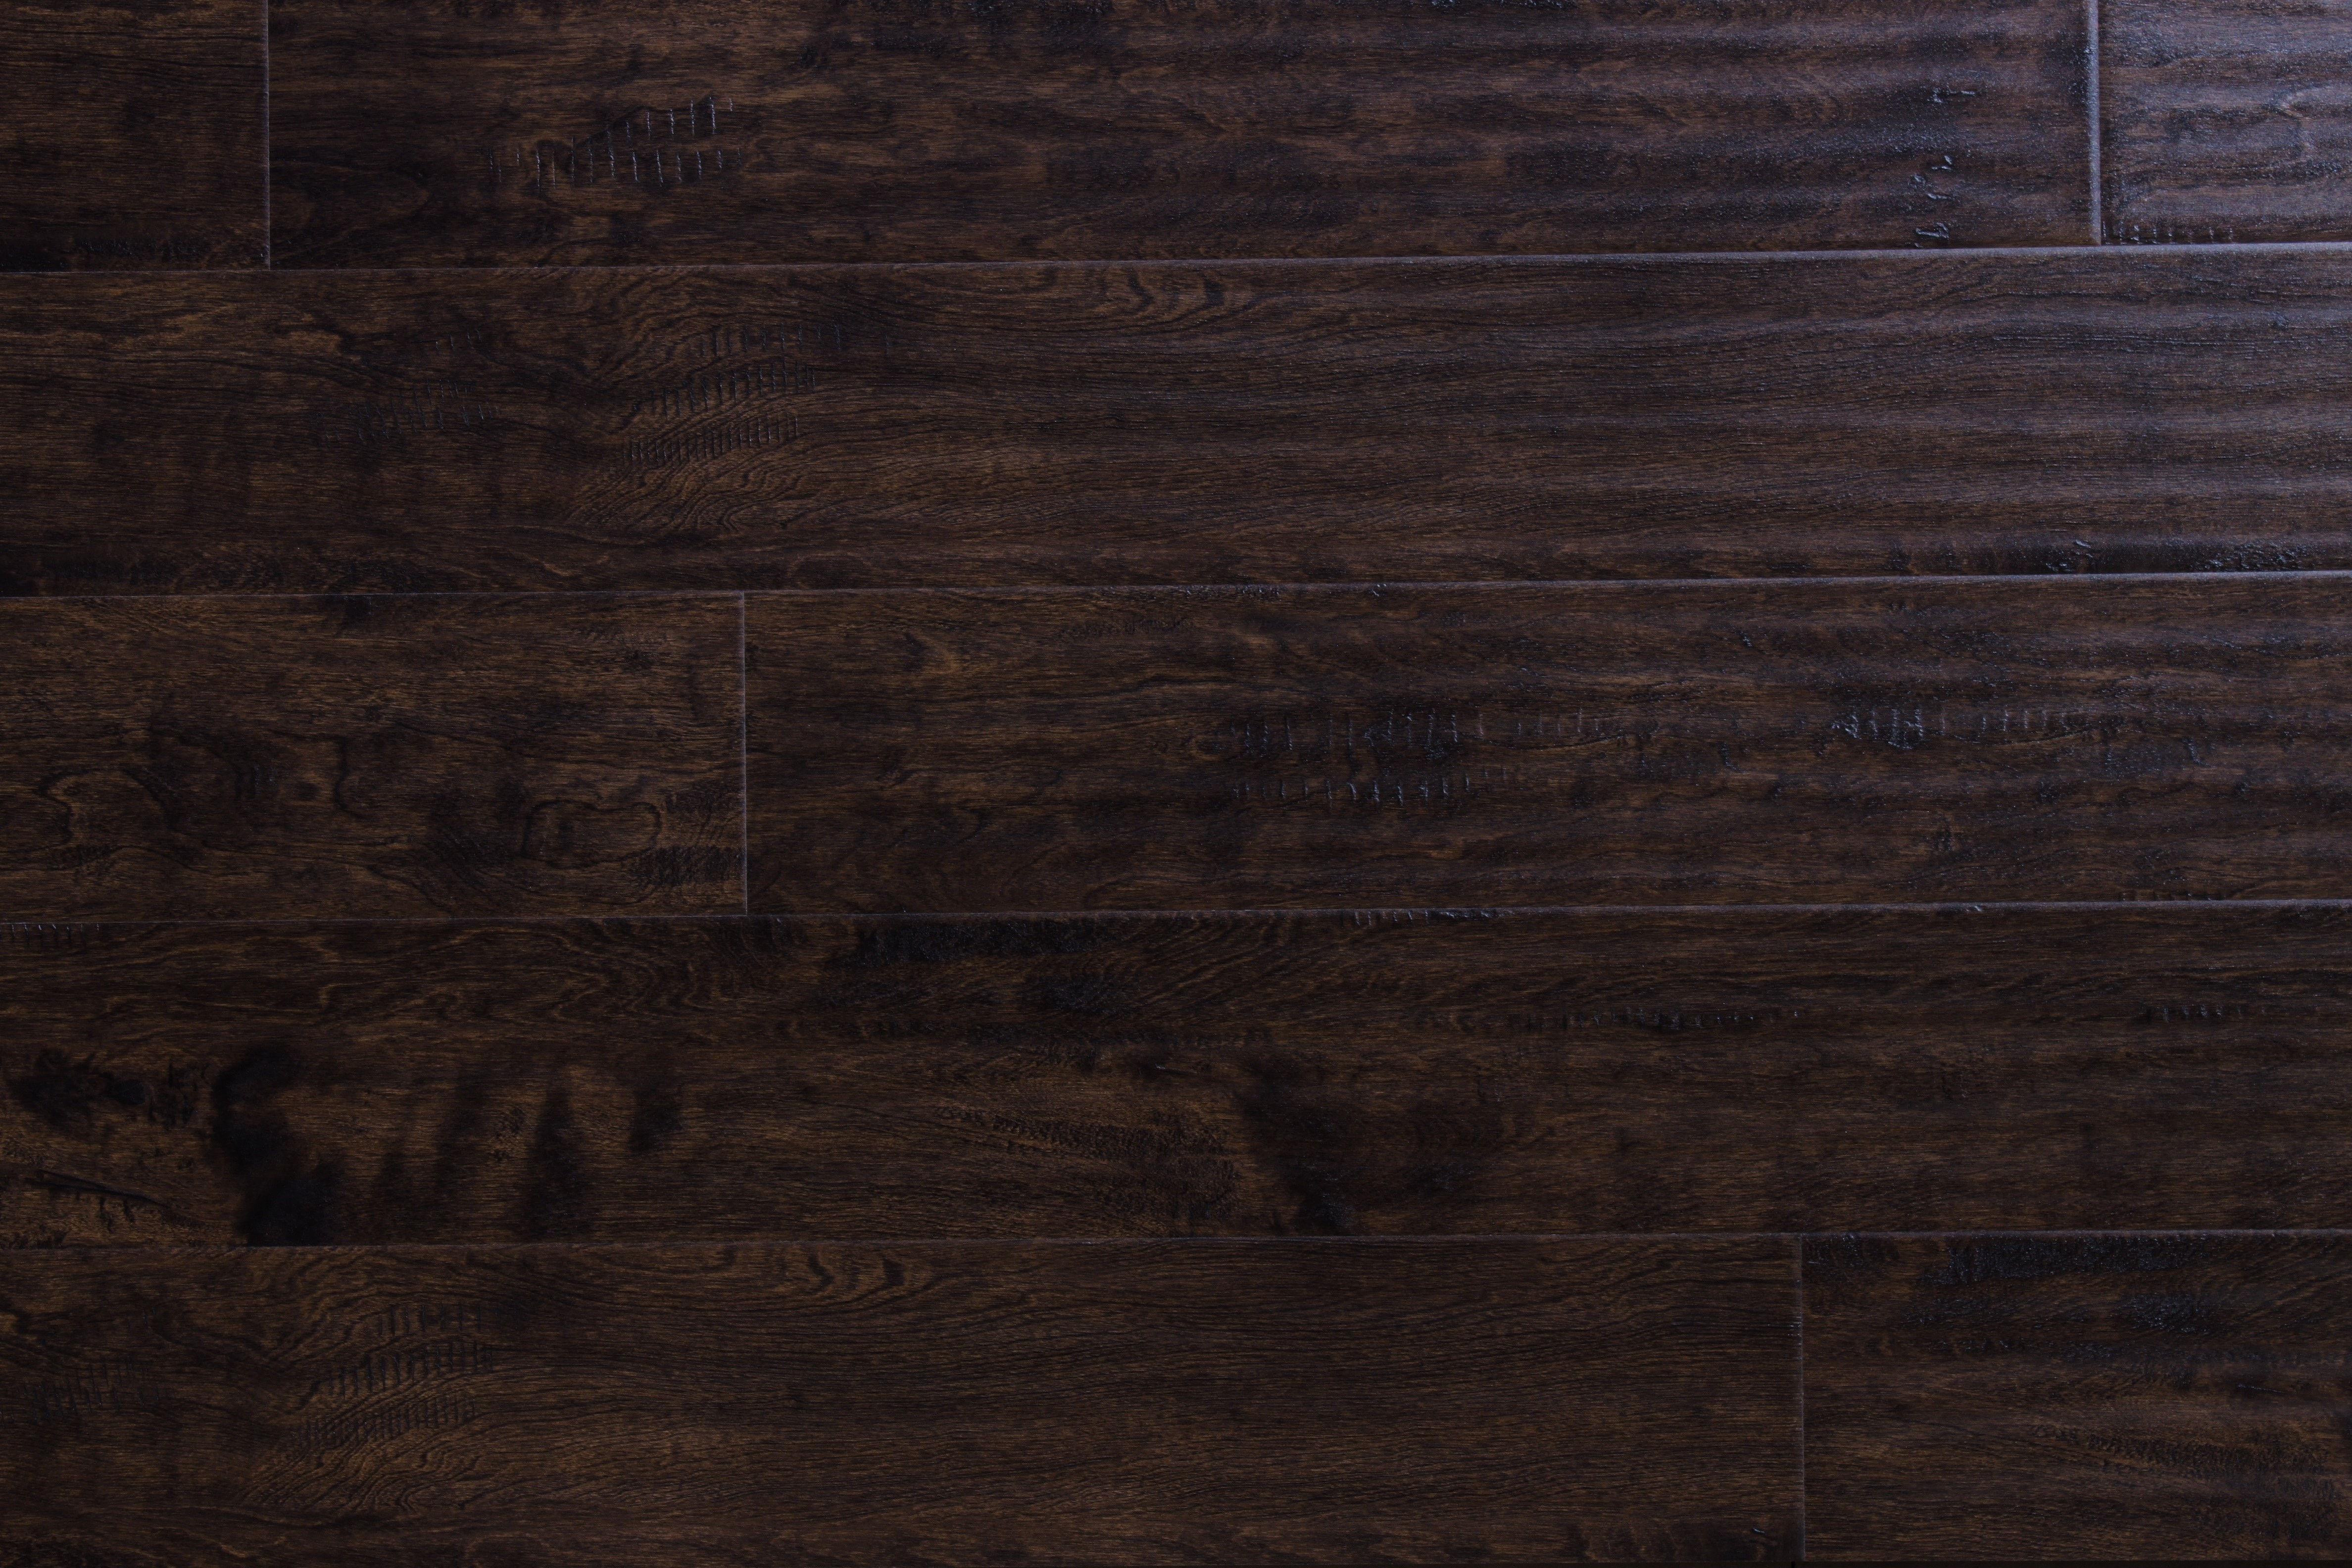 21 Great Hardwood Flooring for Sale Near Me 2024 free download hardwood flooring for sale near me of wood flooring free samples available at builddirecta throughout tailor multi gb 5874277bb8d3c